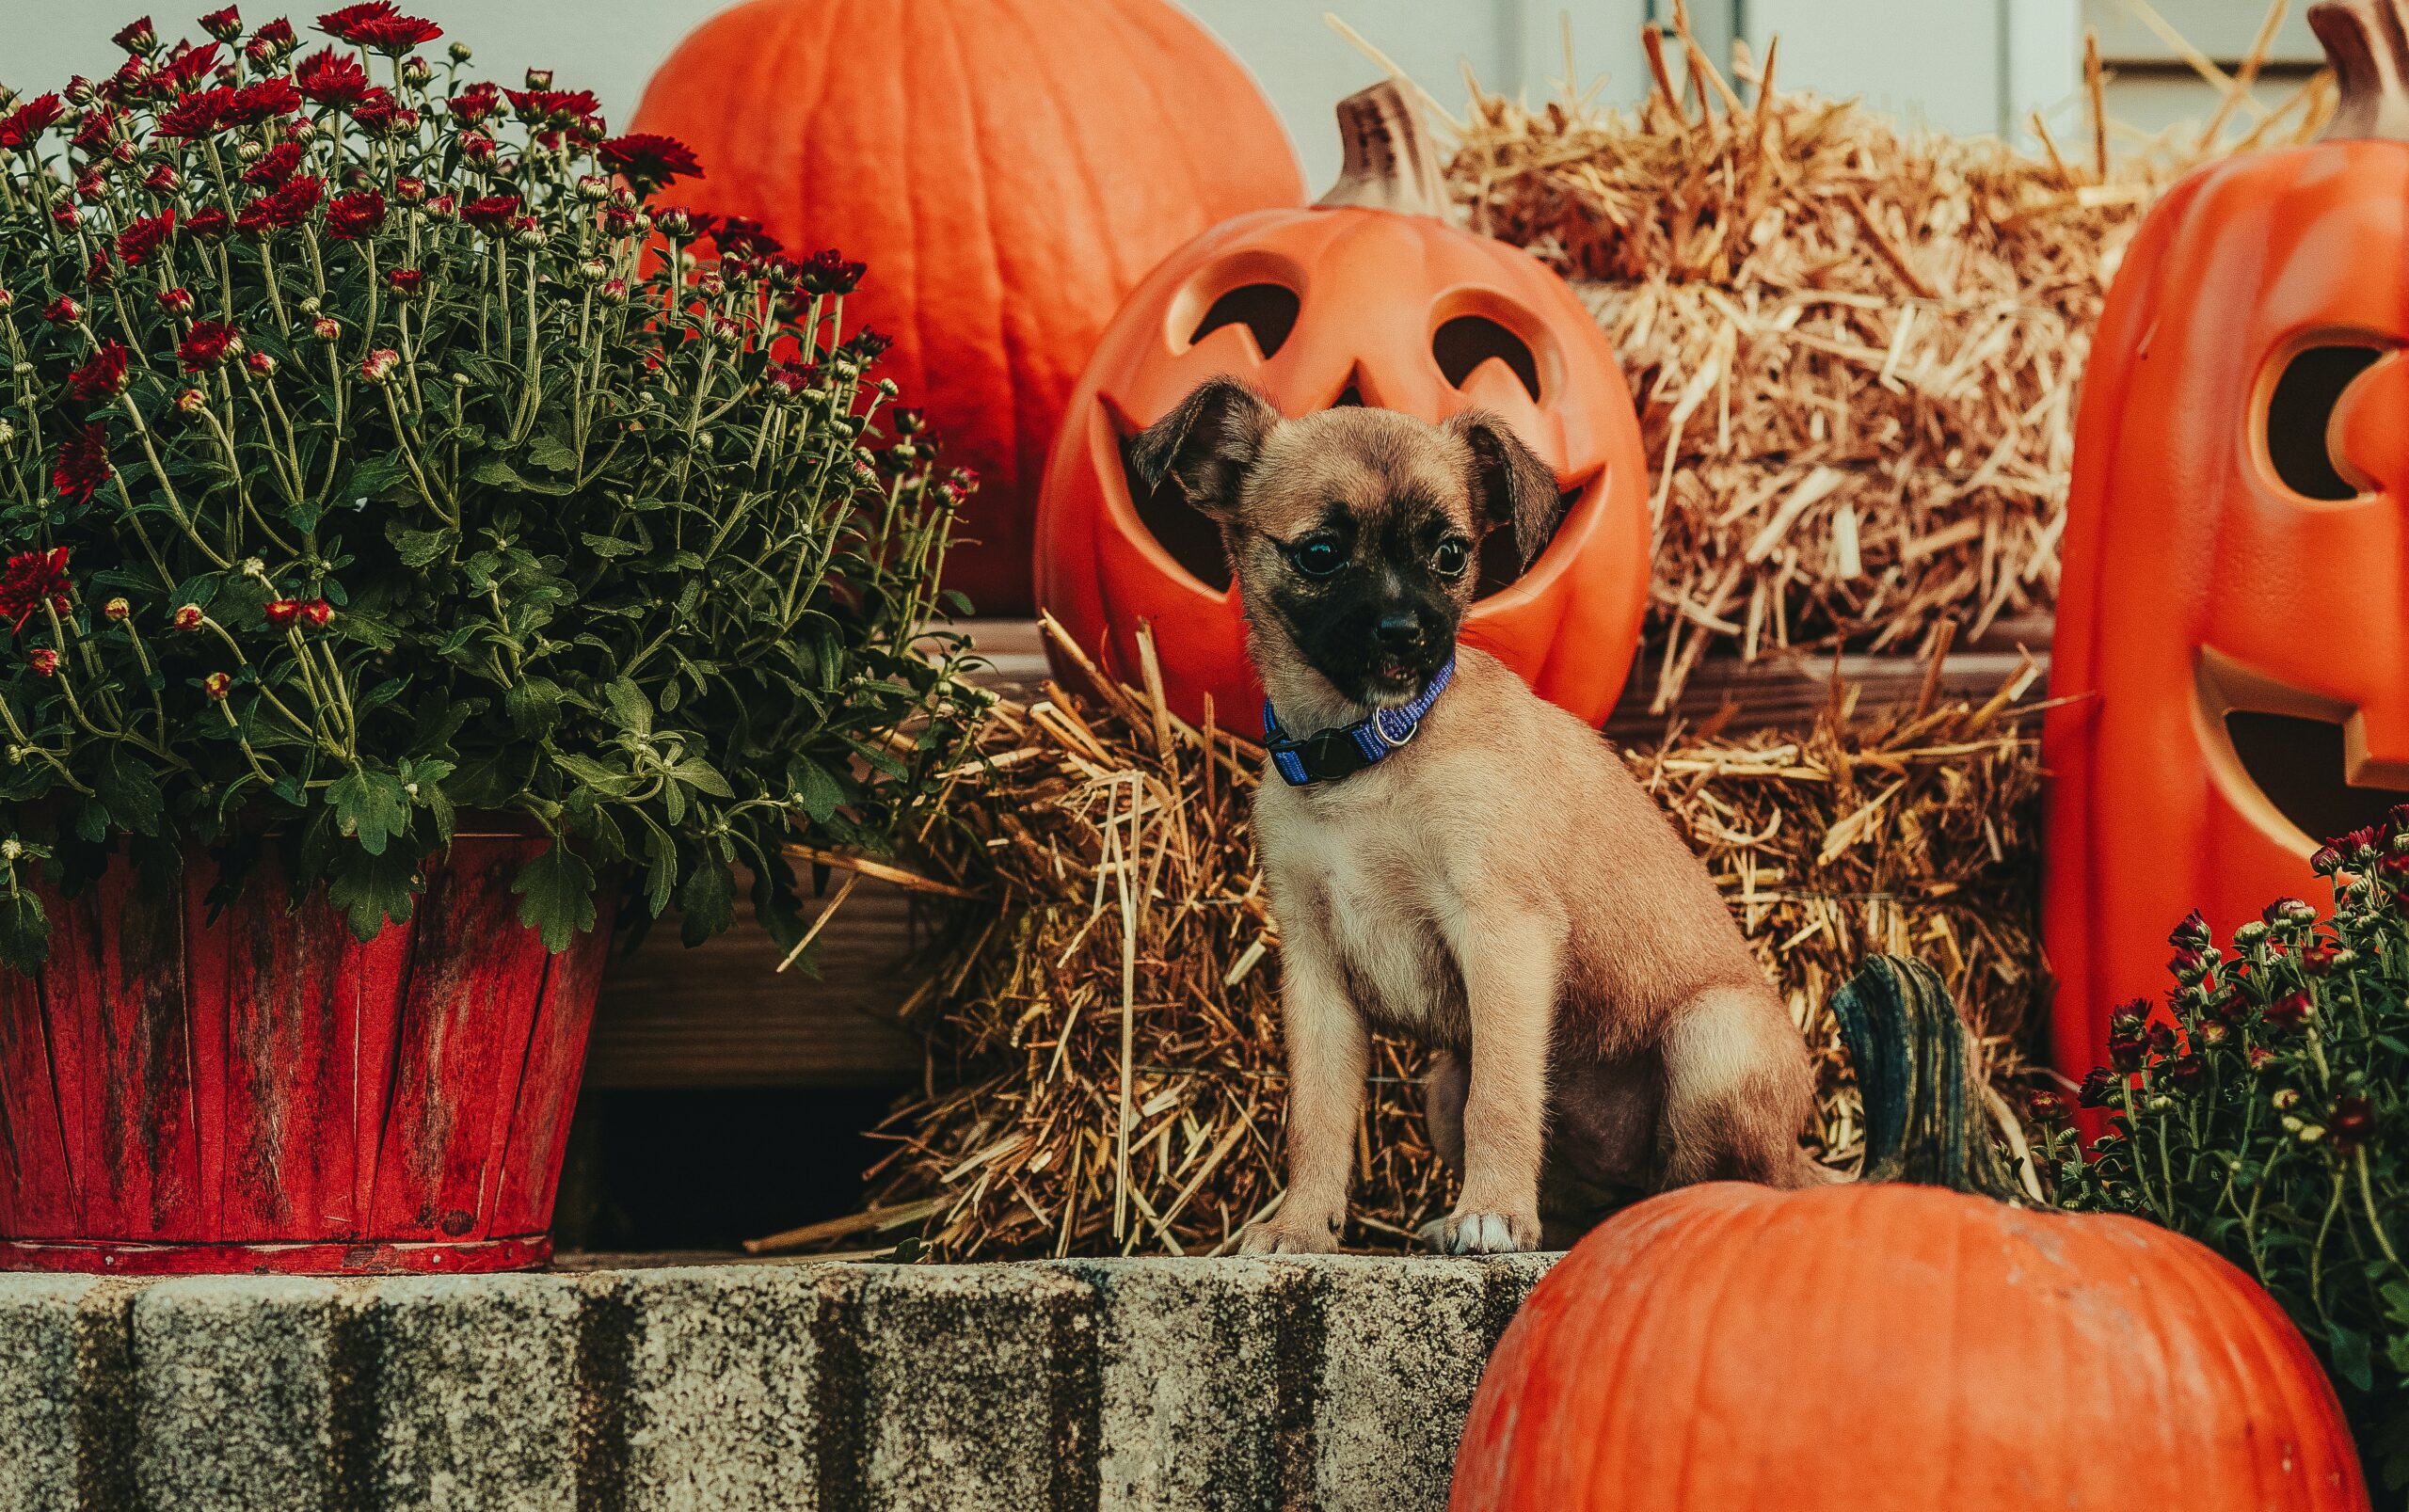 Dog surrounded by Halloween pumpkins